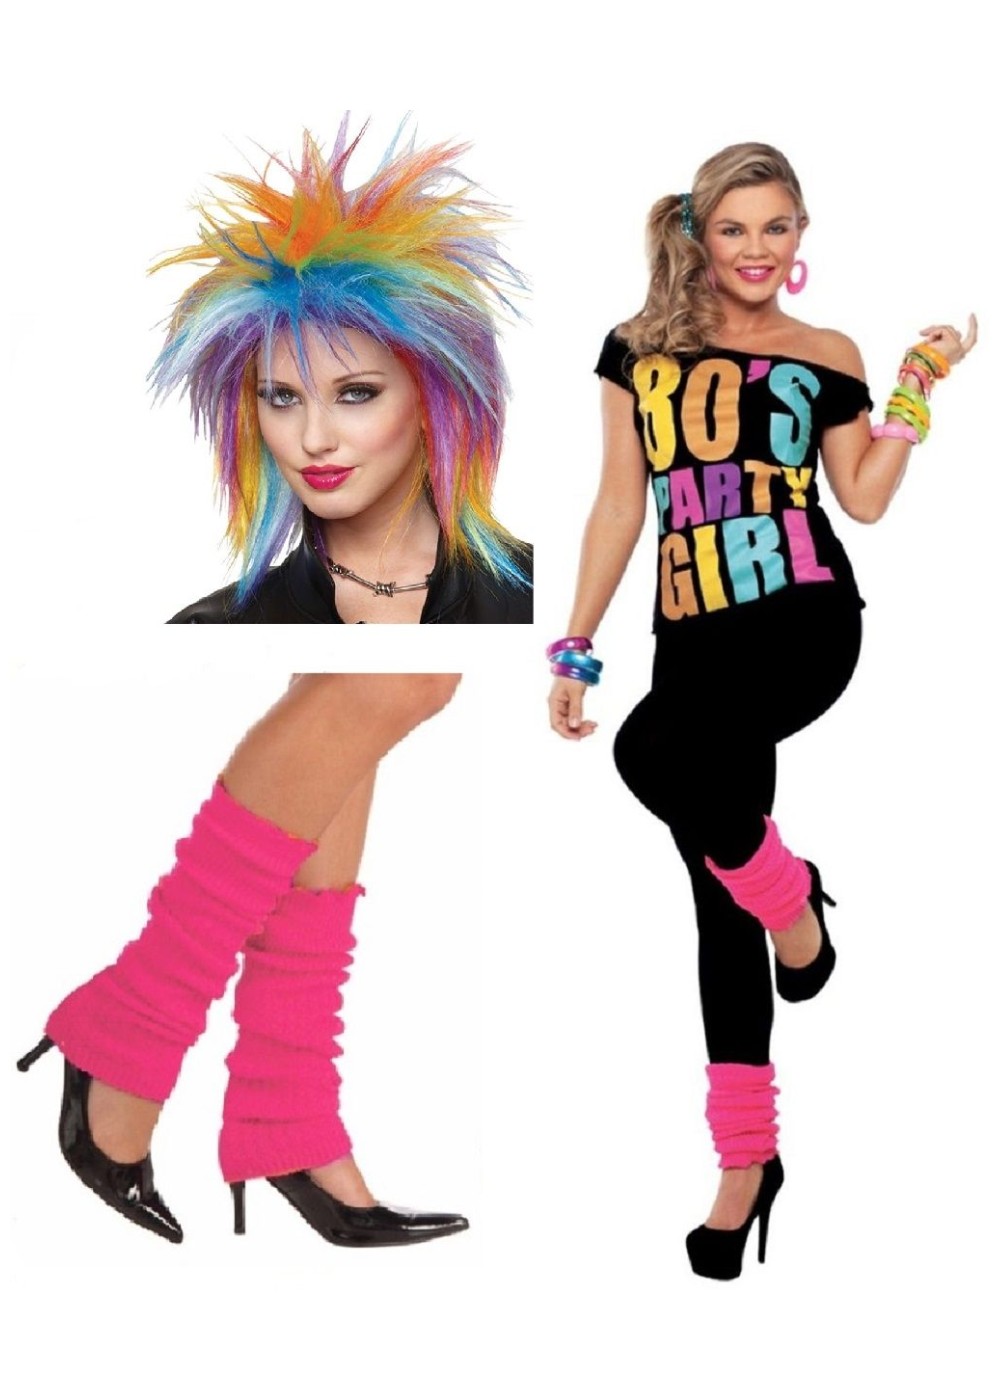 1980s Party Girl Outfit Set 1980s Costumes New for 2016